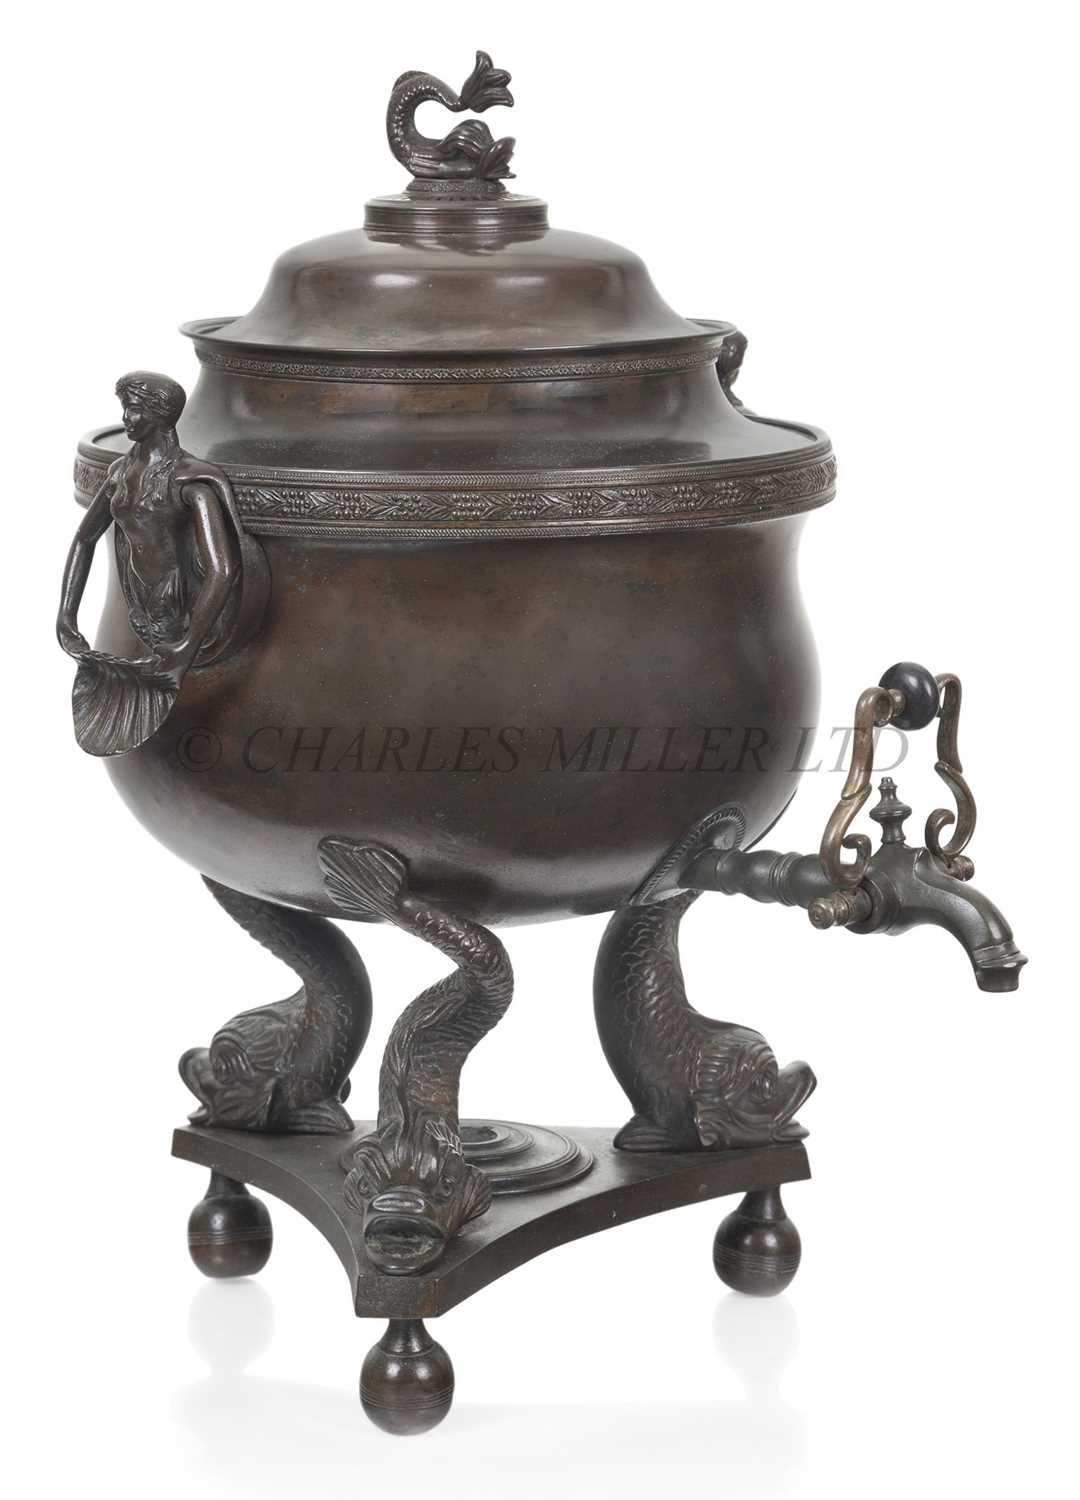 Lot 11 - A 19TH CENTURY MARINE-THEMED COPPER HOT WATER URN